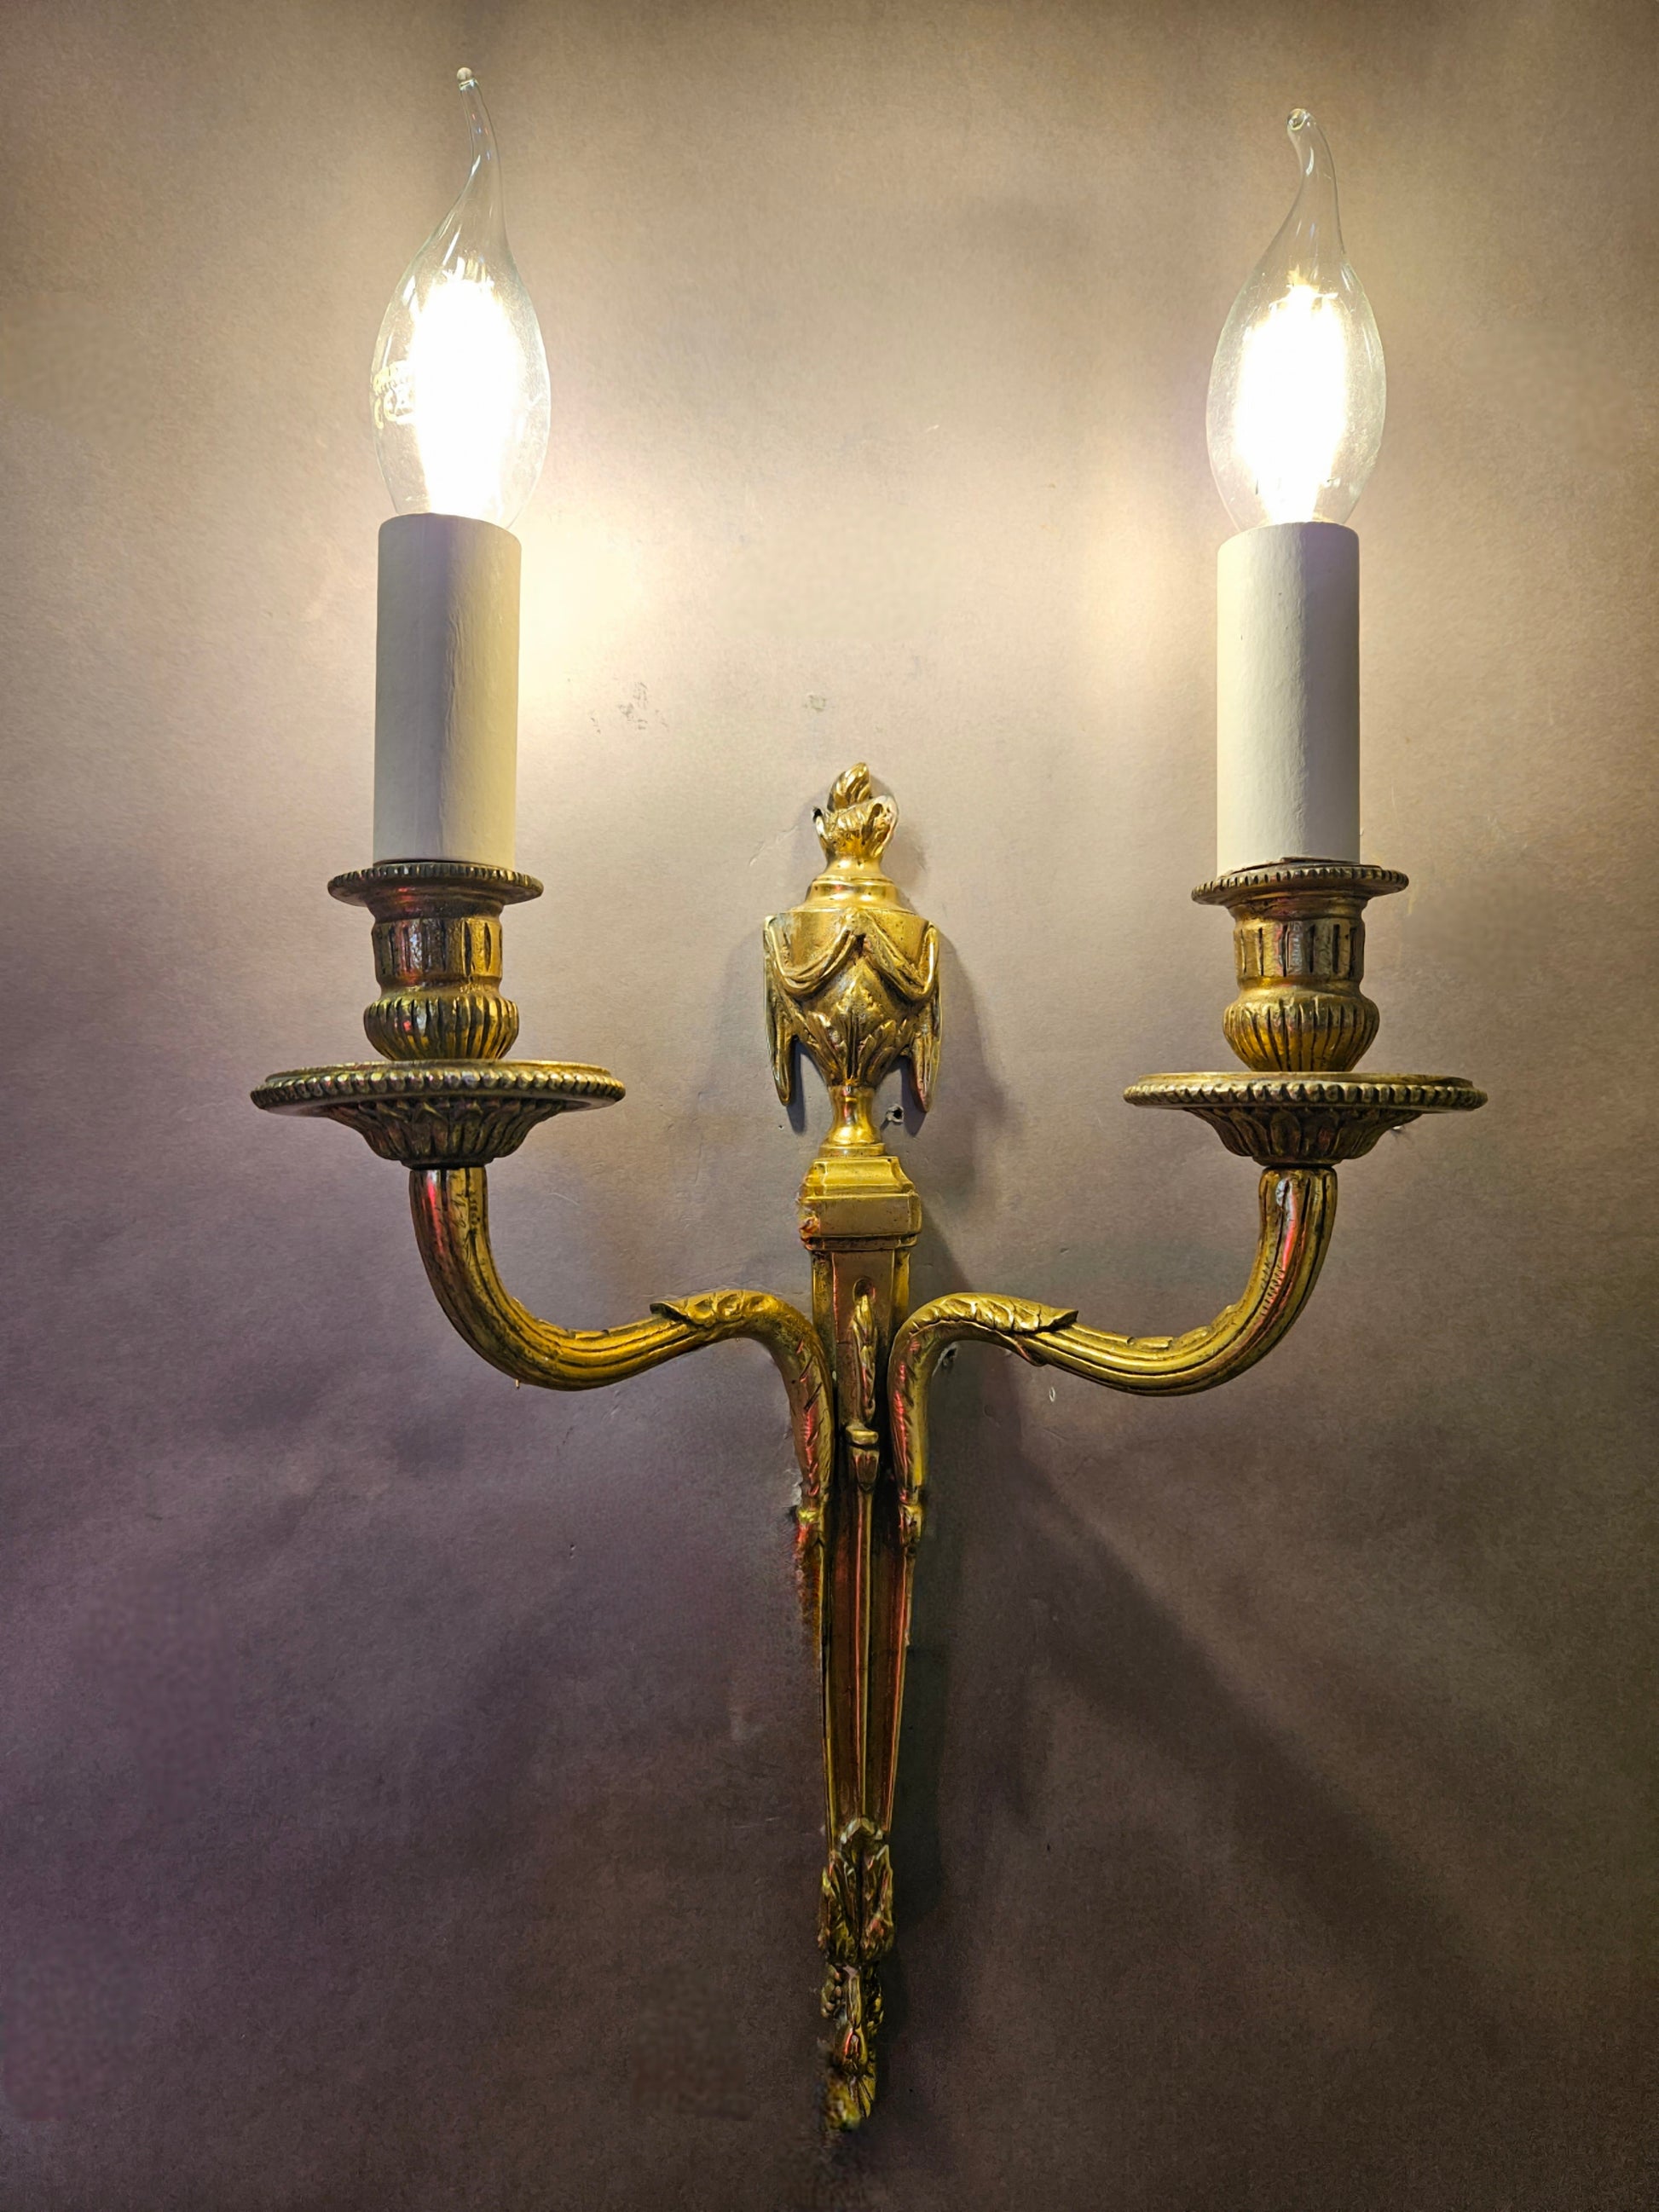 front view with wall light lit